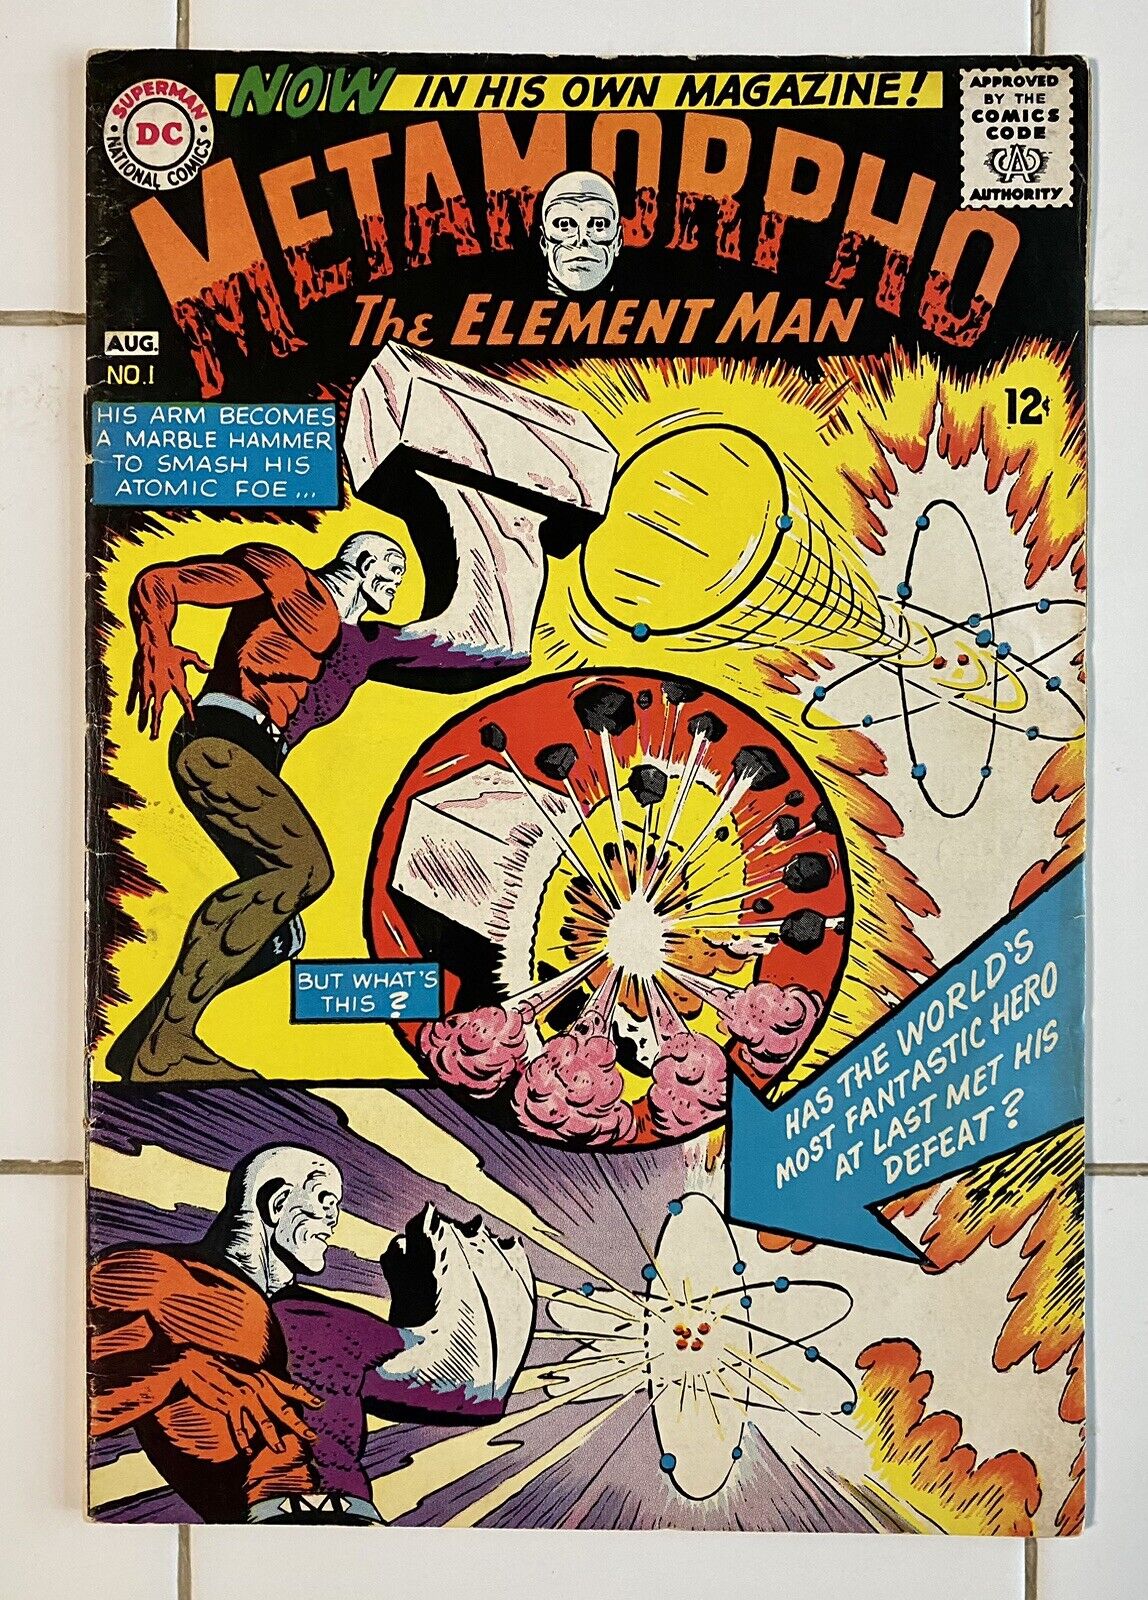 METAMORPHO The Element Man #1 1965 DC Comics (First Solo Issue)